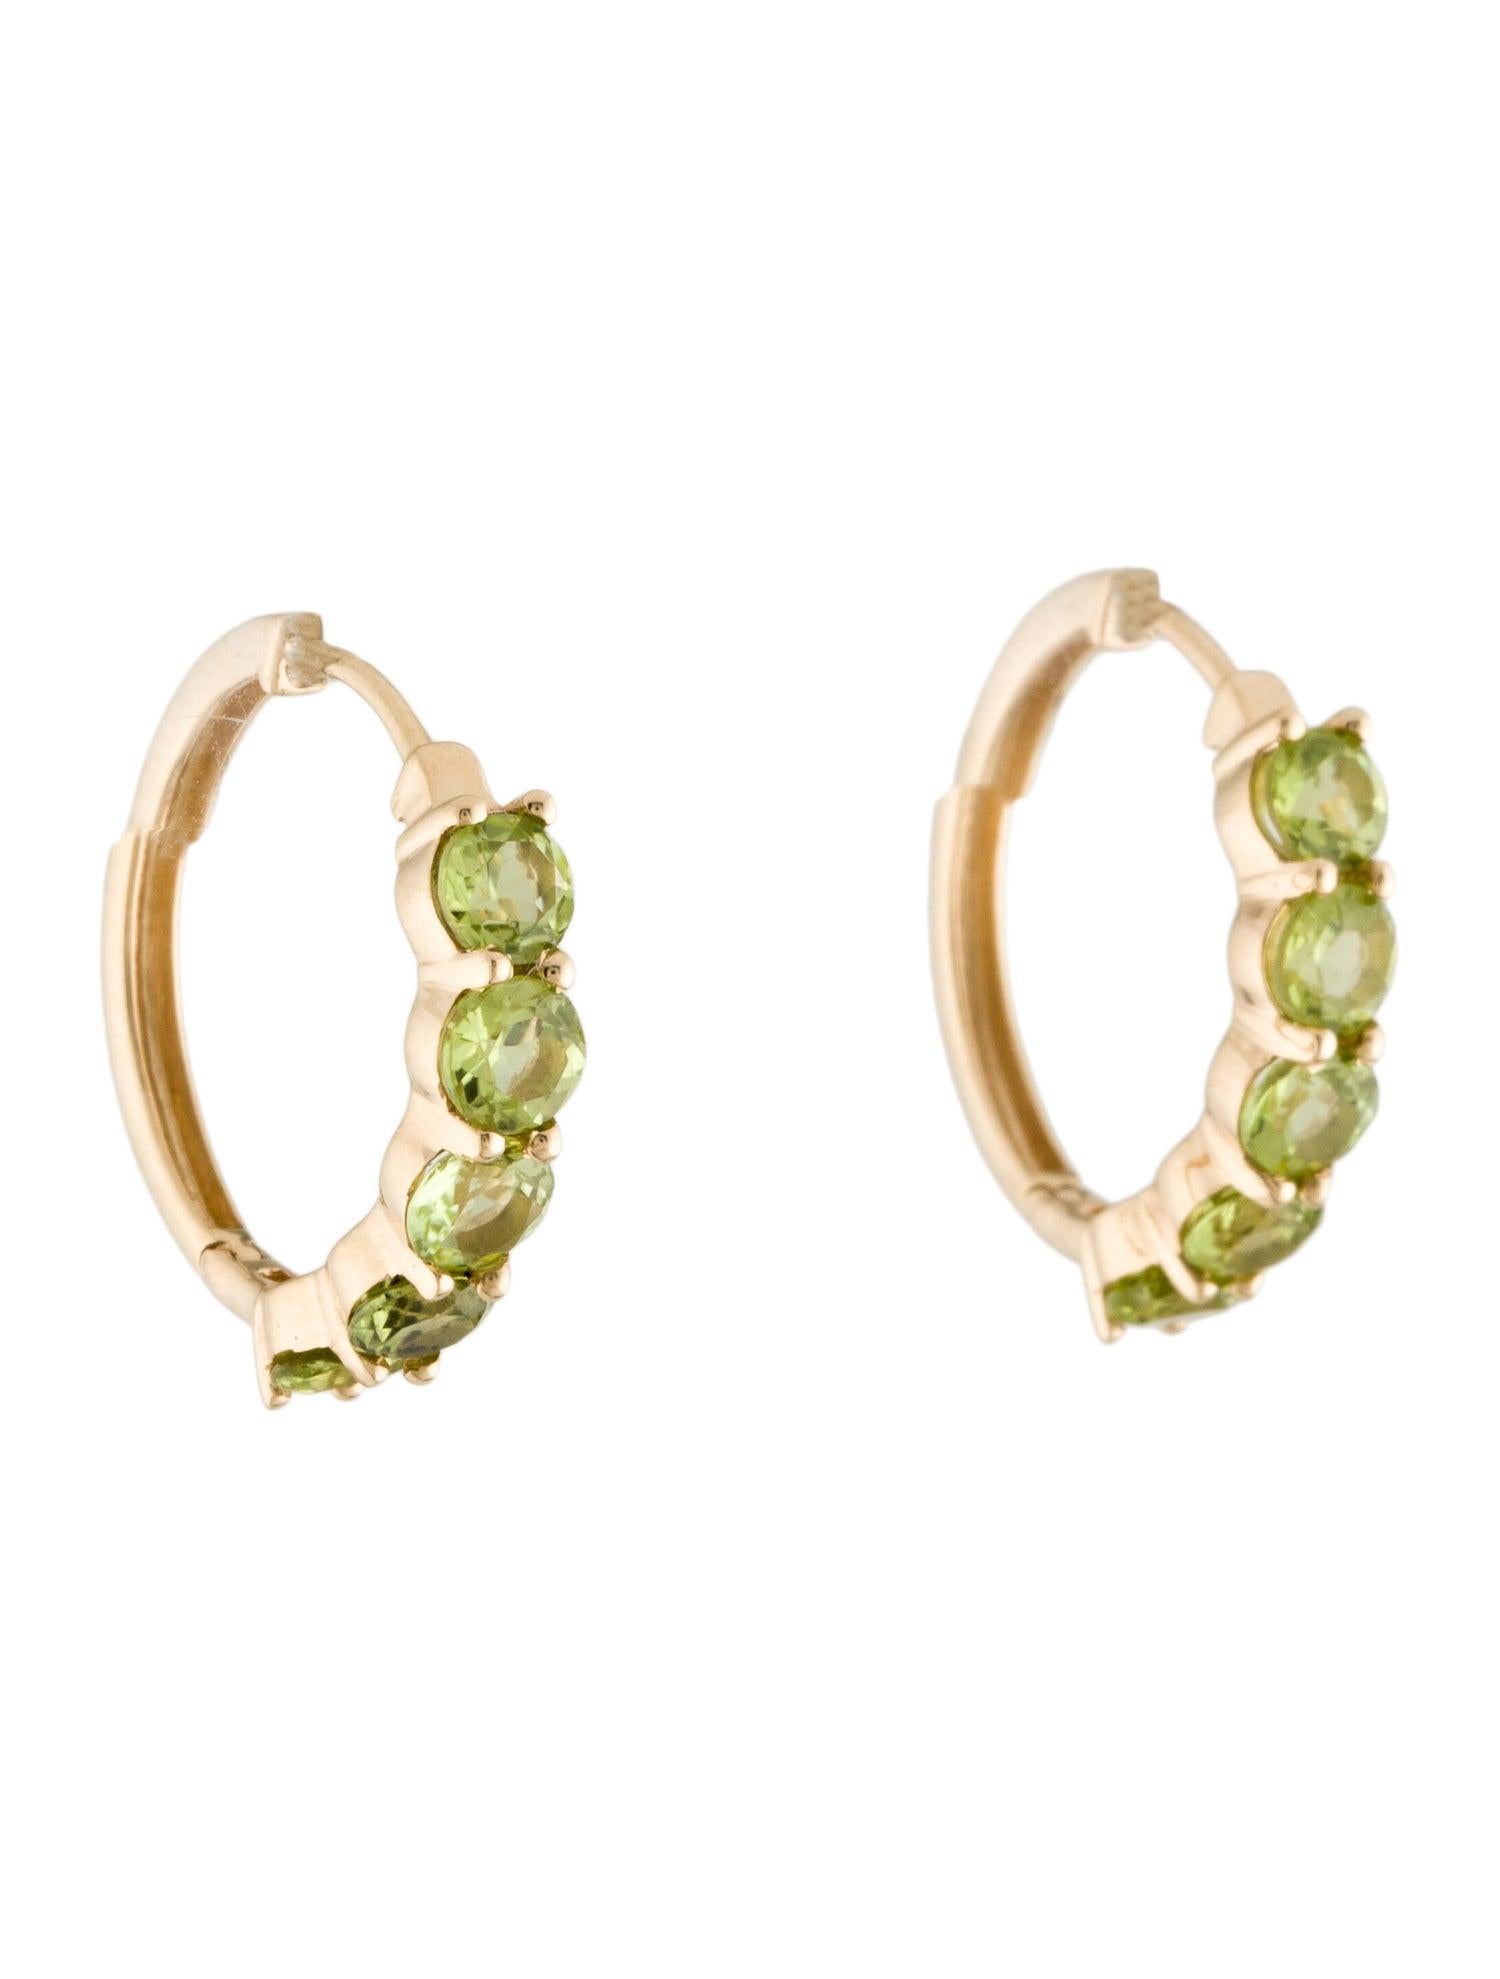 Elevate your style with the enchanting allure of our Harmony in Green Peridot Serenity Earrings from Jeweltique. Inspired by the soothing and refreshing qualities of the Peridot stone, this collection embodies harmony and serenity, seamlessly